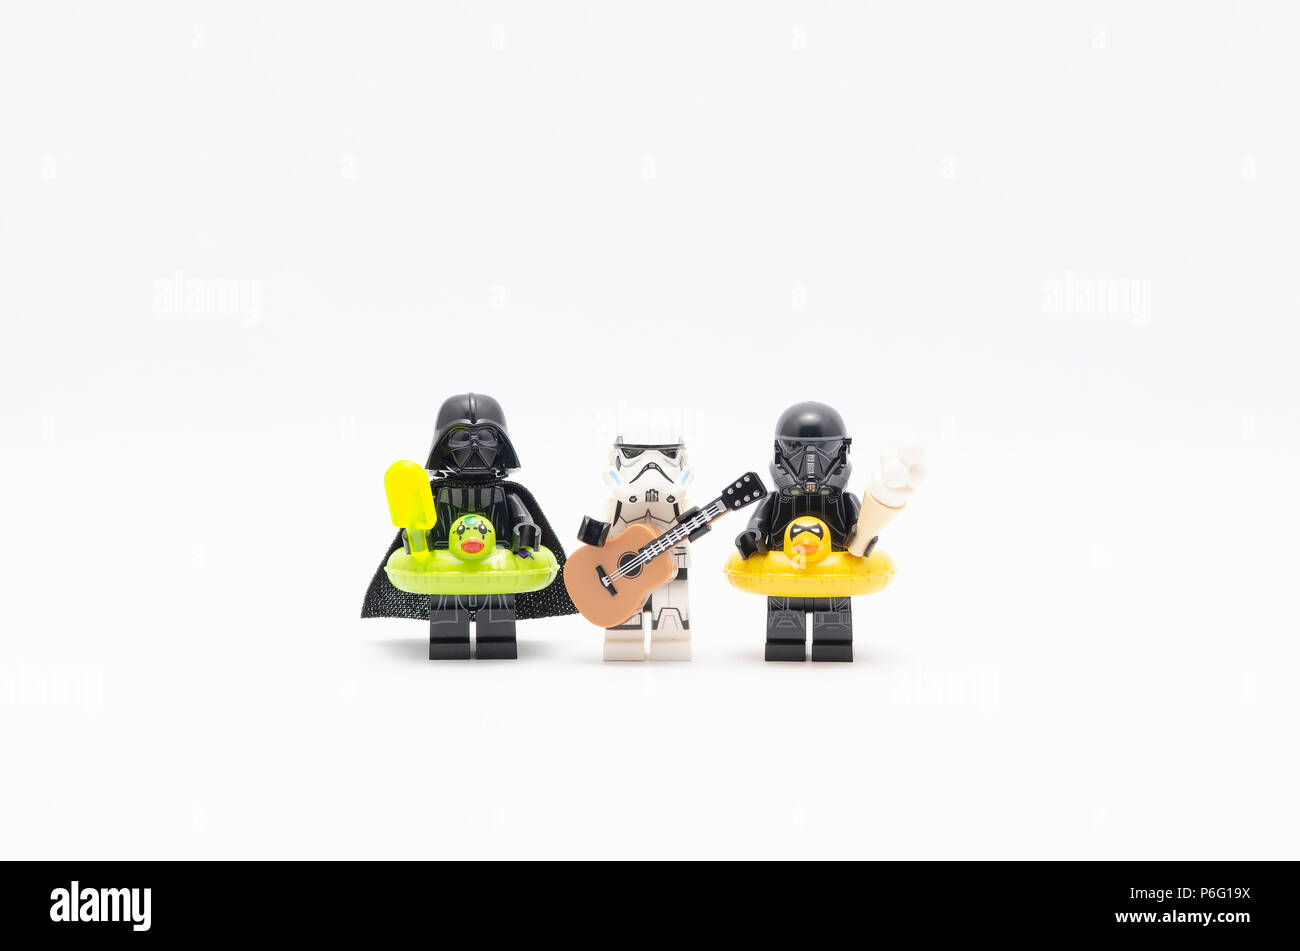 mini figure of  darth vader with storm trooper holding guitar and death trooper holding ice cream. Lego minifigures are manufactured by The Lego Group Stock Photo